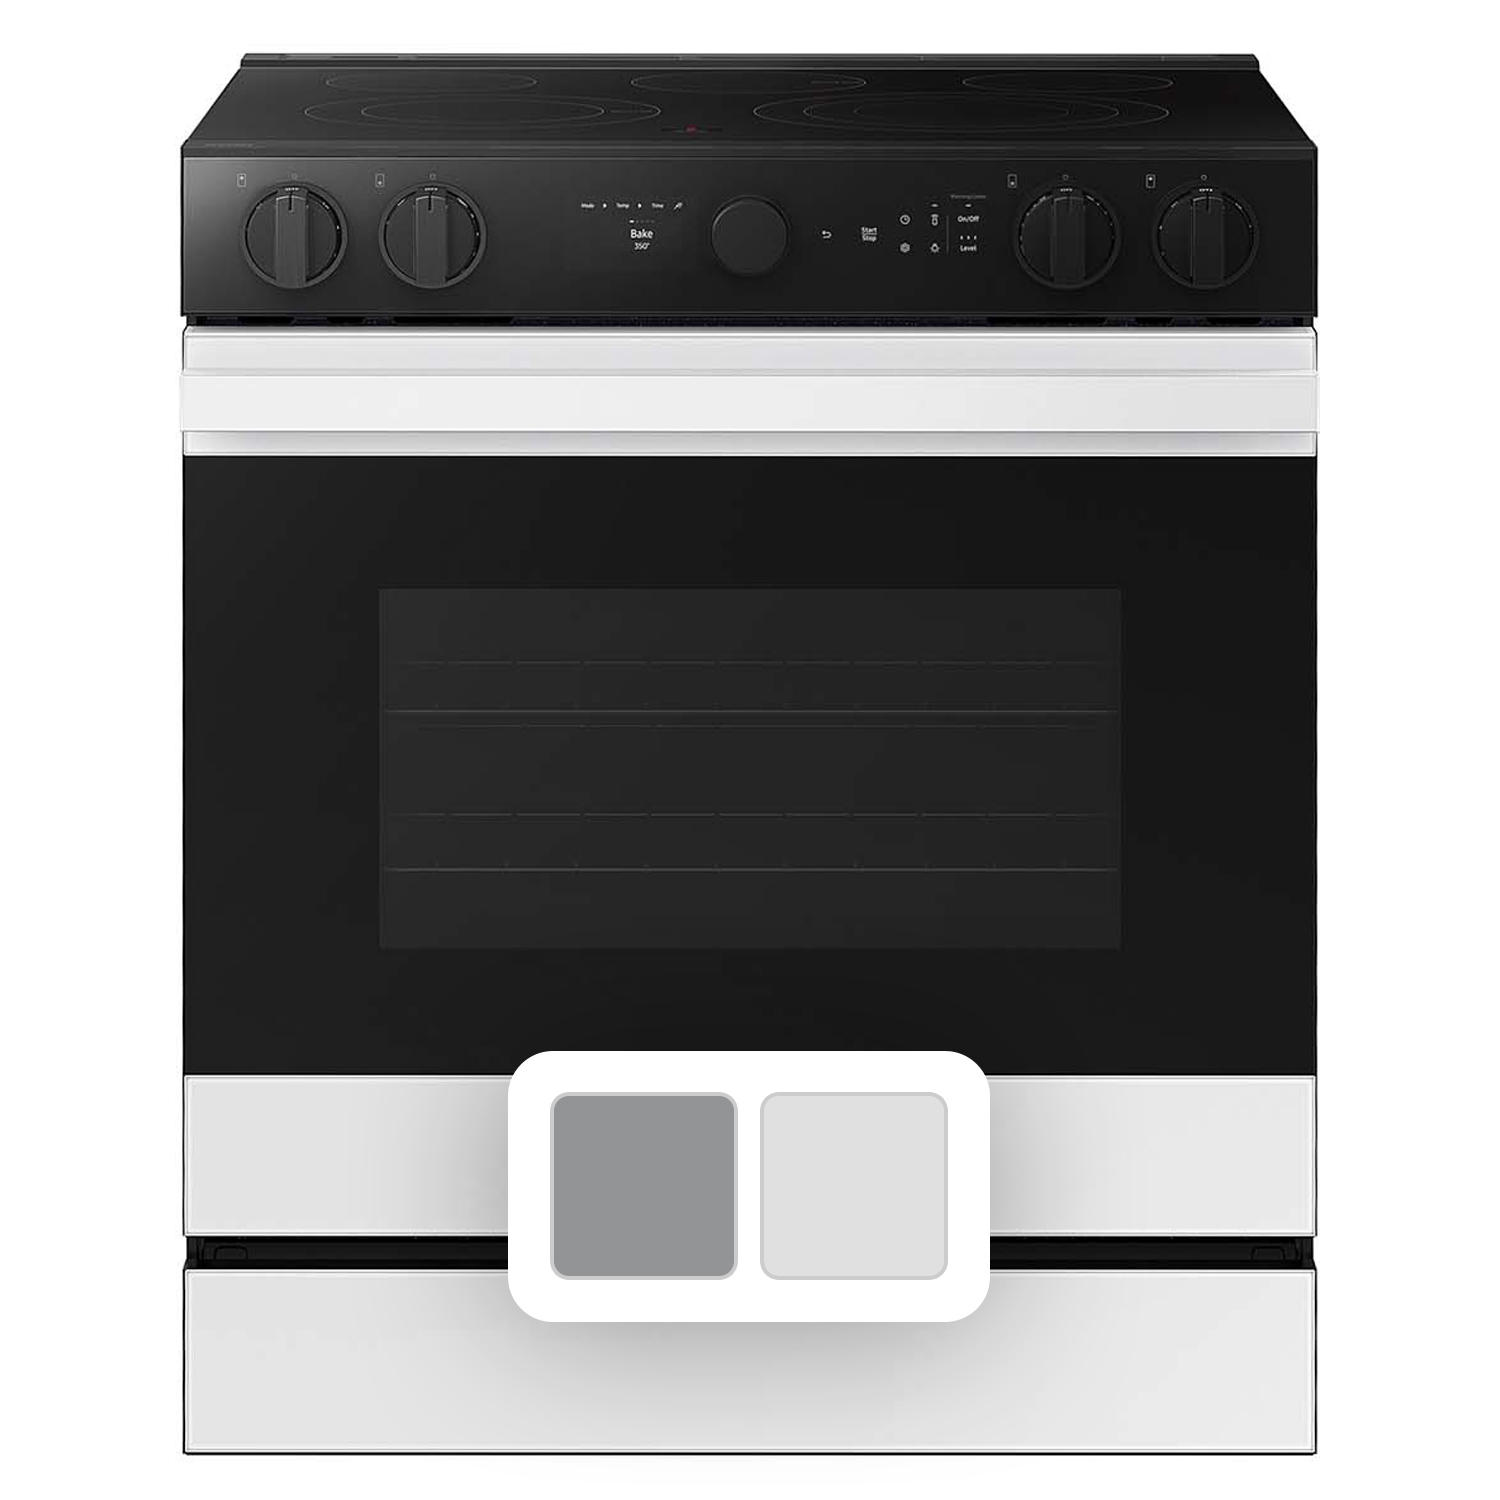 Samsung Bespoke Smart Slide-In Electric Range 6.3 cu. ft. in Stainless steel with Smart Oven Camera & Illuminated Safety